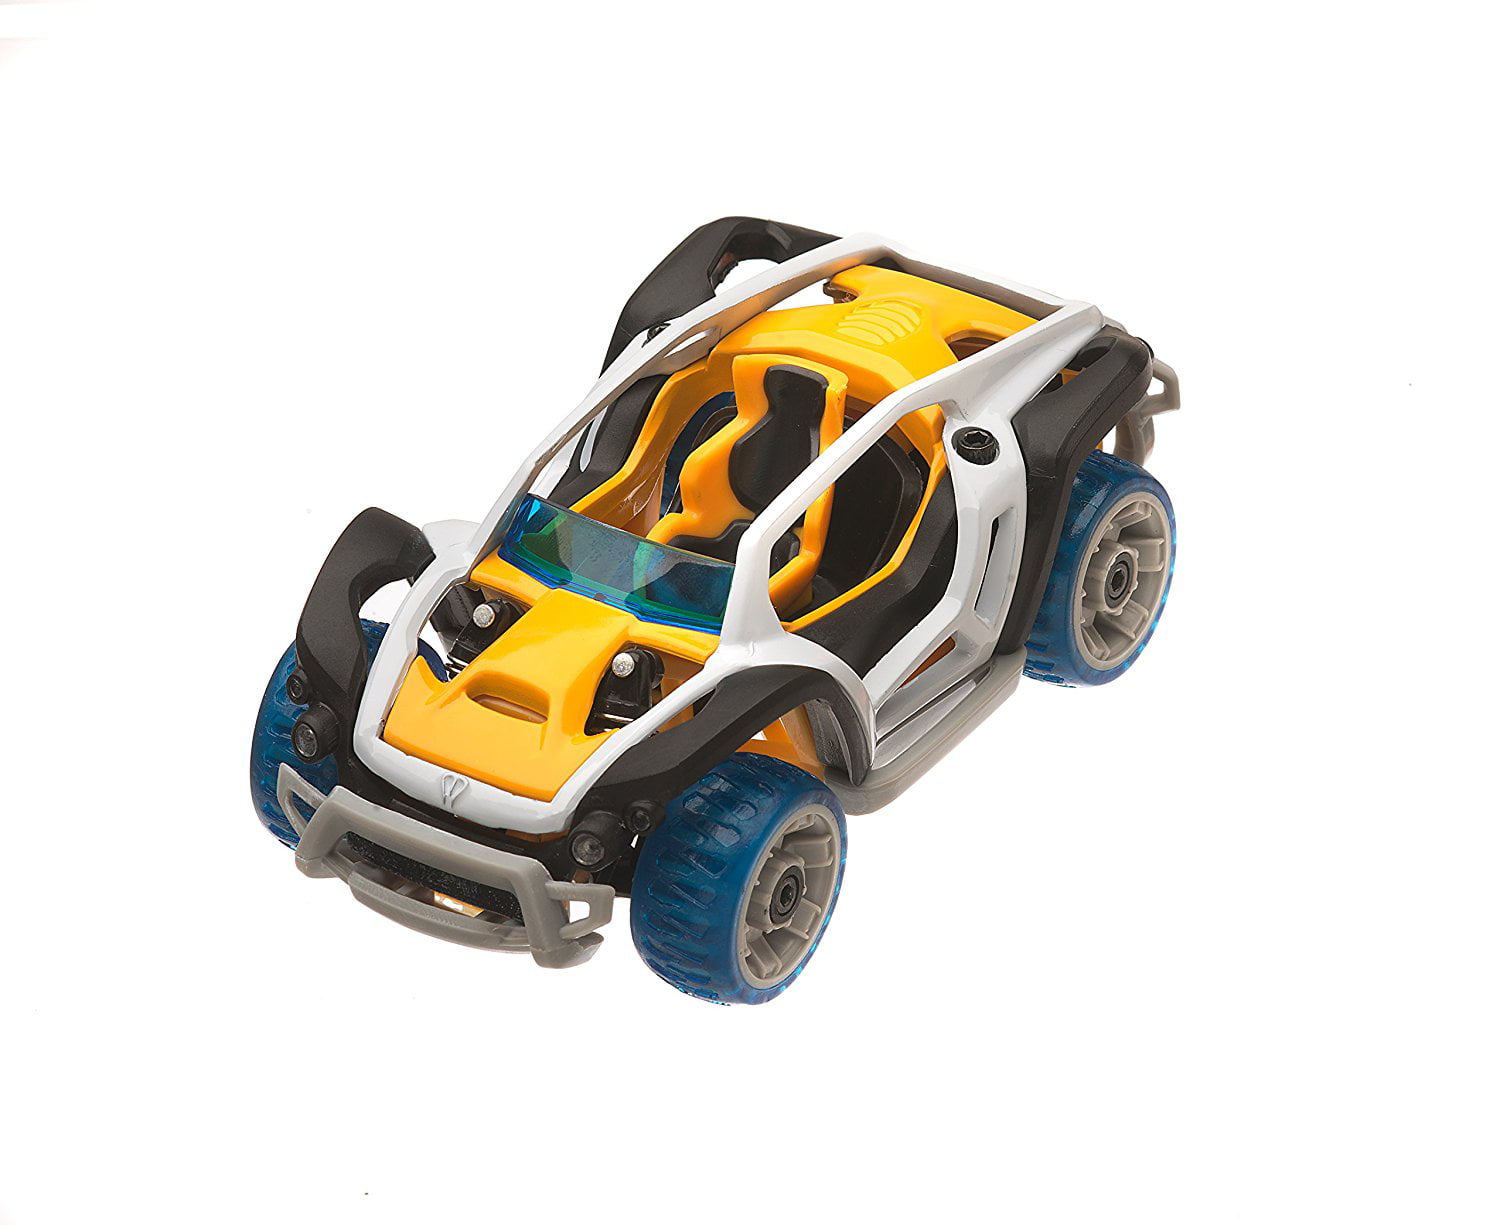 Real Steering and Suspension Educational Take Apart Toy Vehicle for Kids Modarri Delux X1 Dirt Car Build Your Car Kit Toy Set Ultimate Toy Car: Make Your Own Car Toy for Thousands of Designs